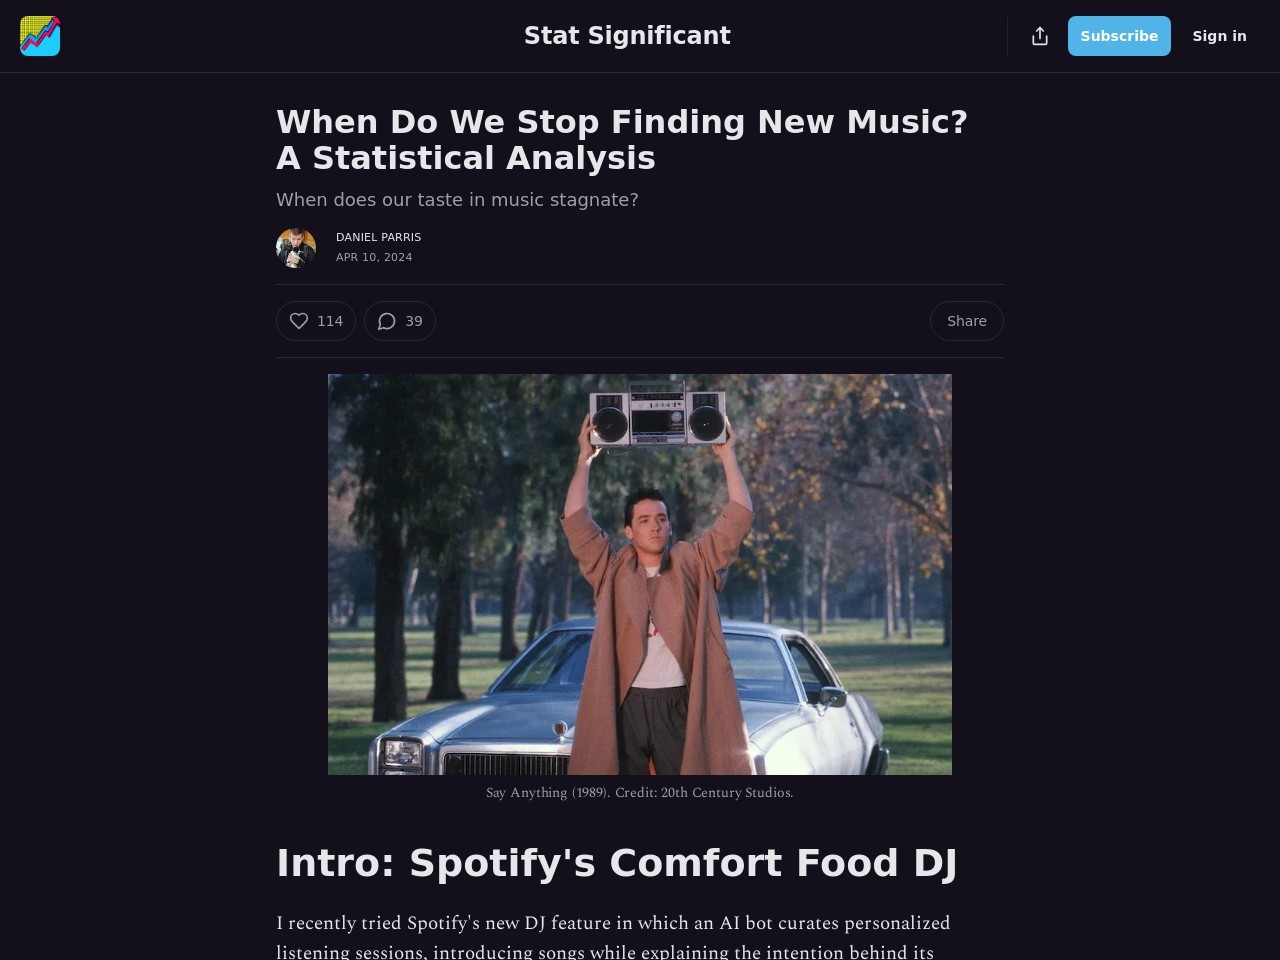 When Do We Stop Finding New Music? A Statistical Analysis